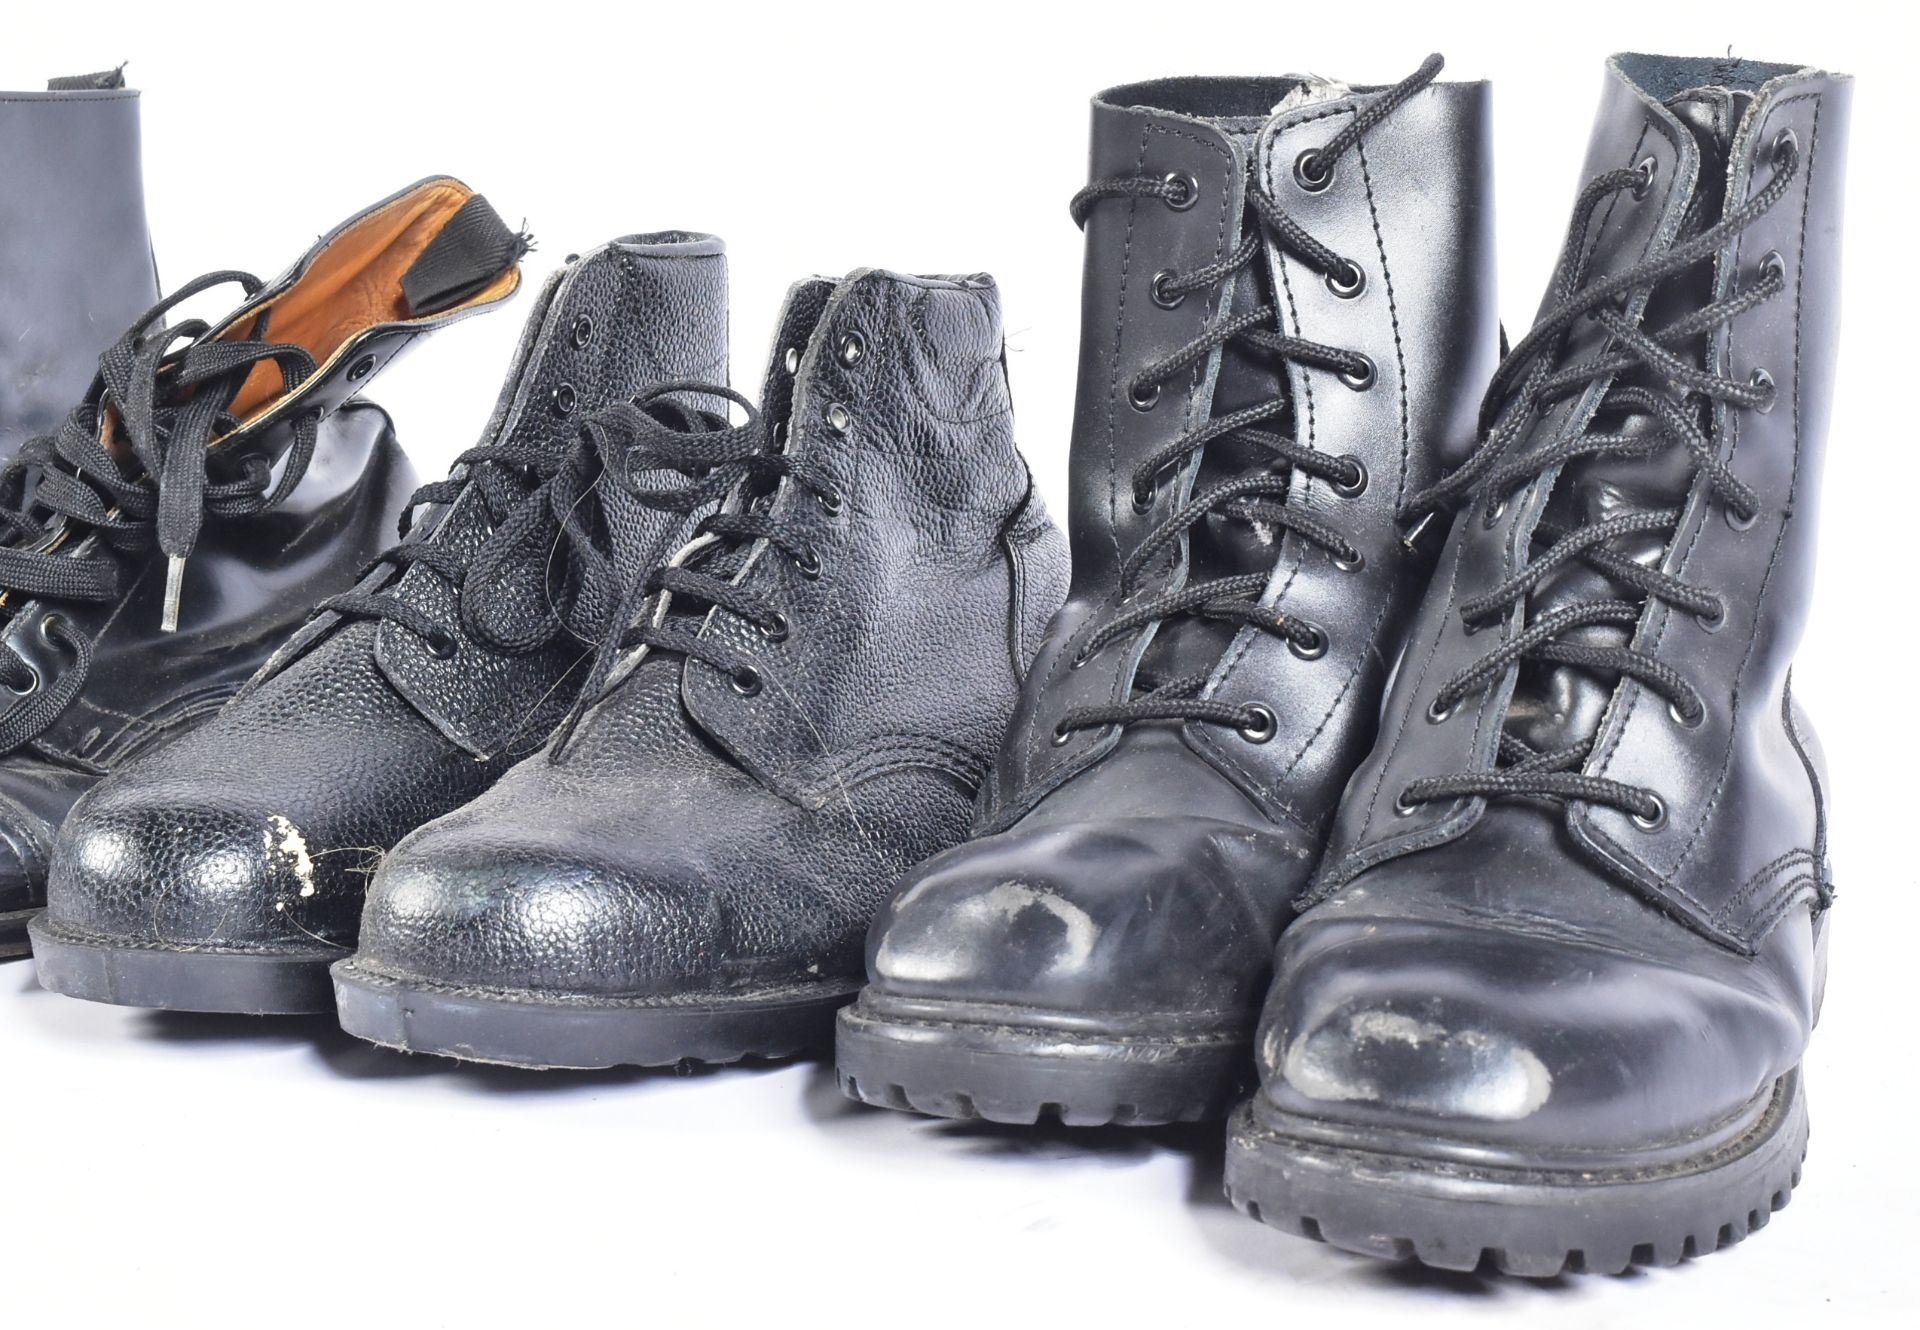 COLLECTION OF MILITARY STYLE LEATHER AMMO BOOTS - Image 4 of 5